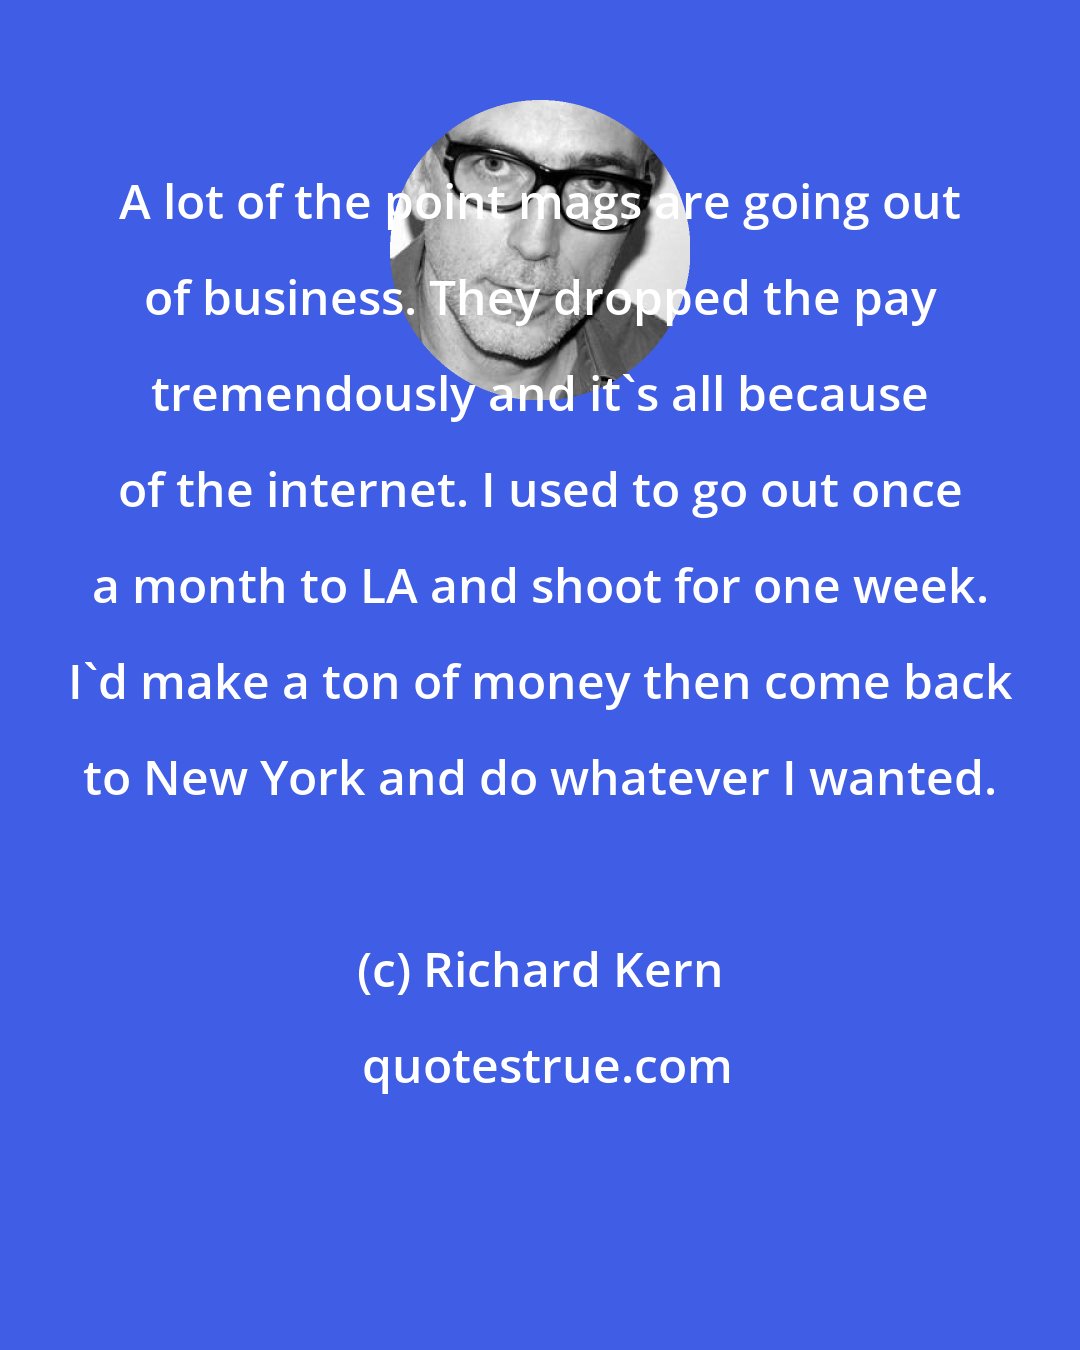 Richard Kern: A lot of the point mags are going out of business. They dropped the pay tremendously and it's all because of the internet. I used to go out once a month to LA and shoot for one week. I'd make a ton of money then come back to New York and do whatever I wanted.